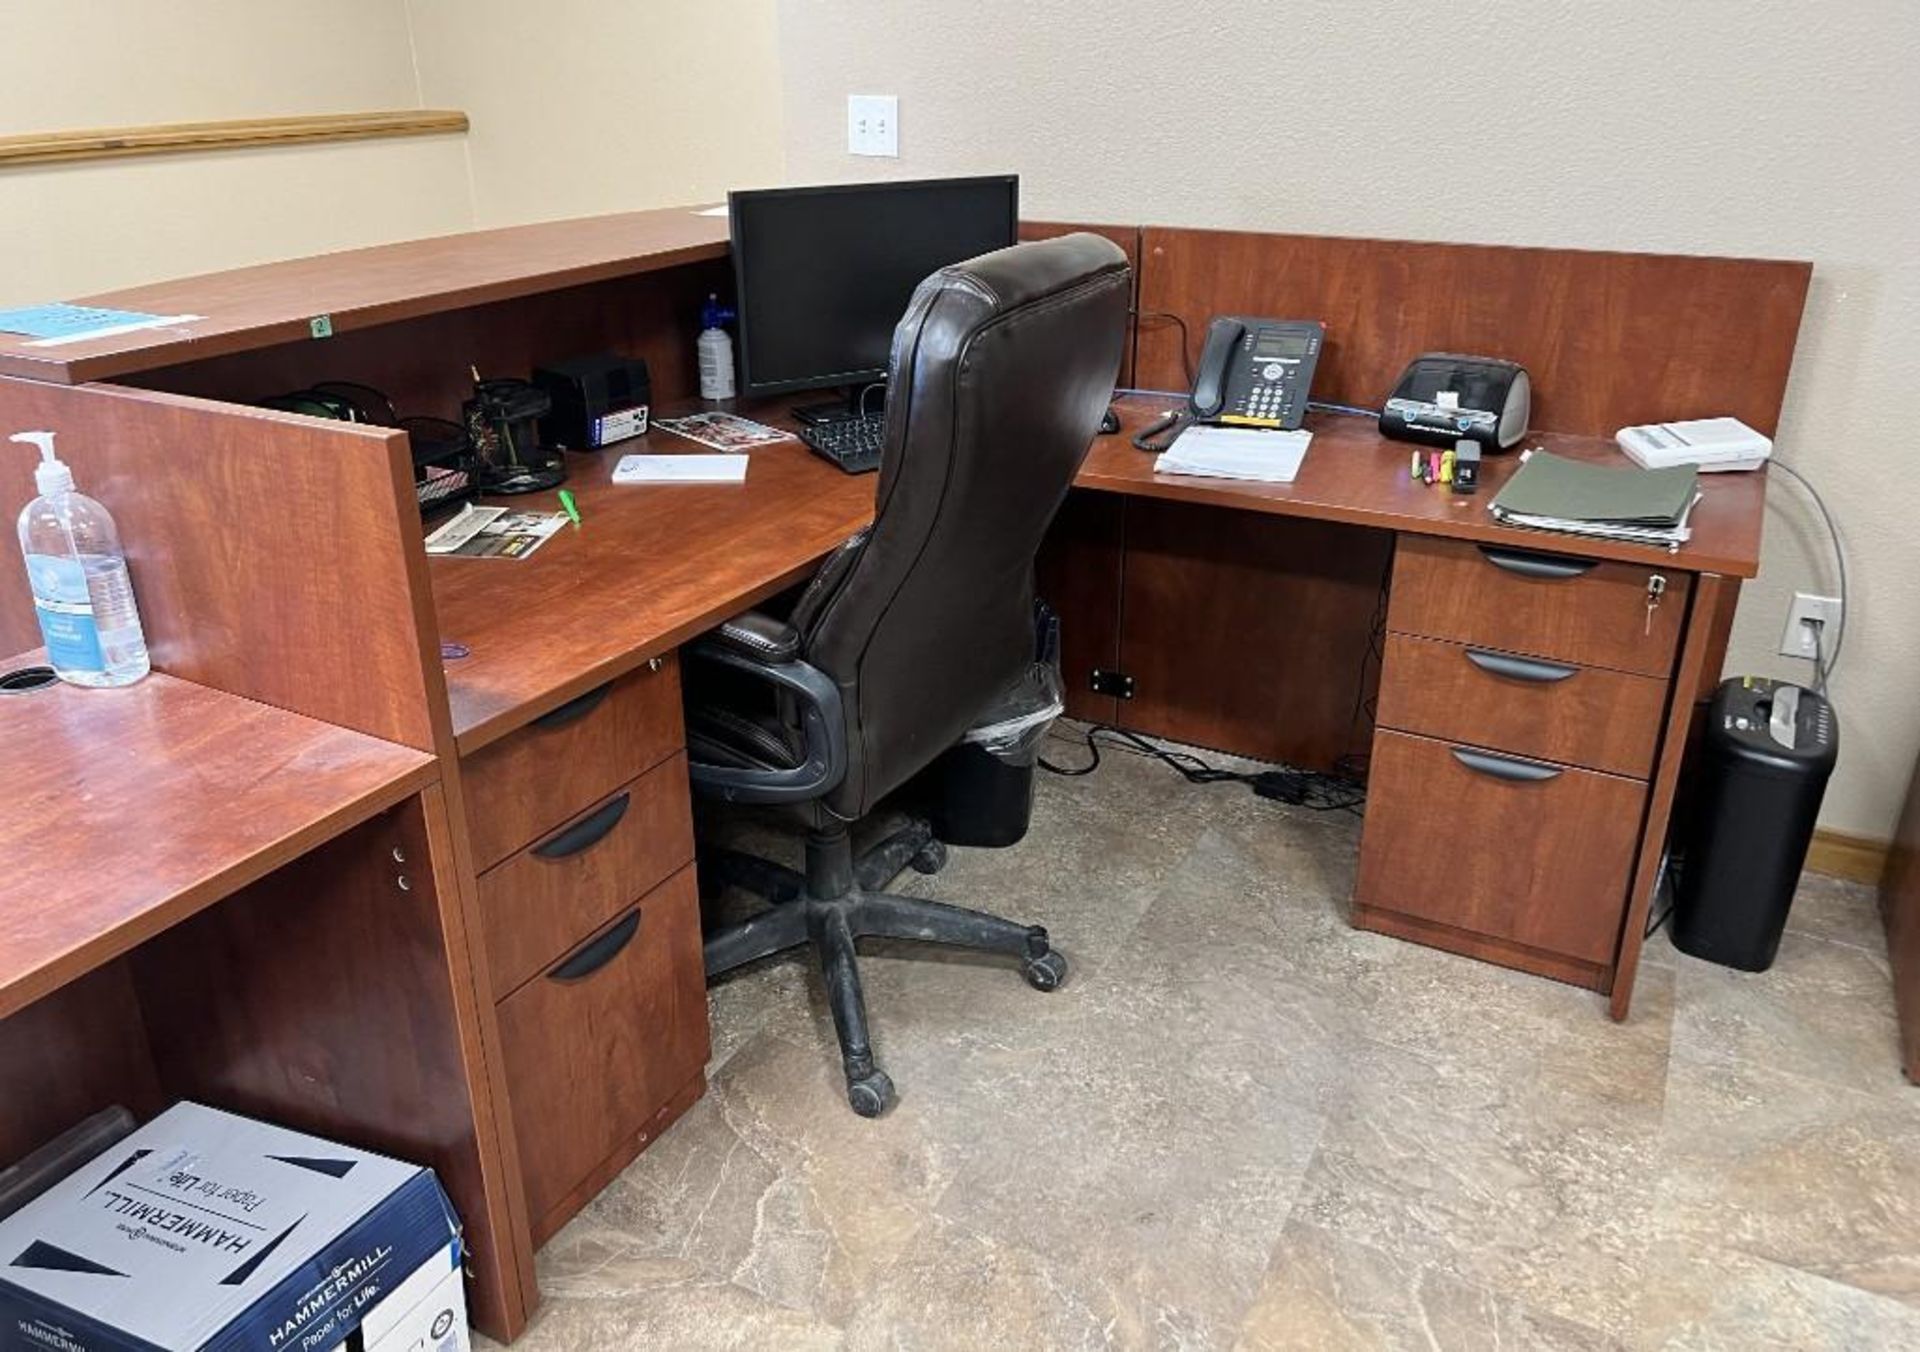 Lot Of Reception Area. With L shaped desk, computer, monitor, keyboard, label maker, chair, shredder - Image 3 of 18